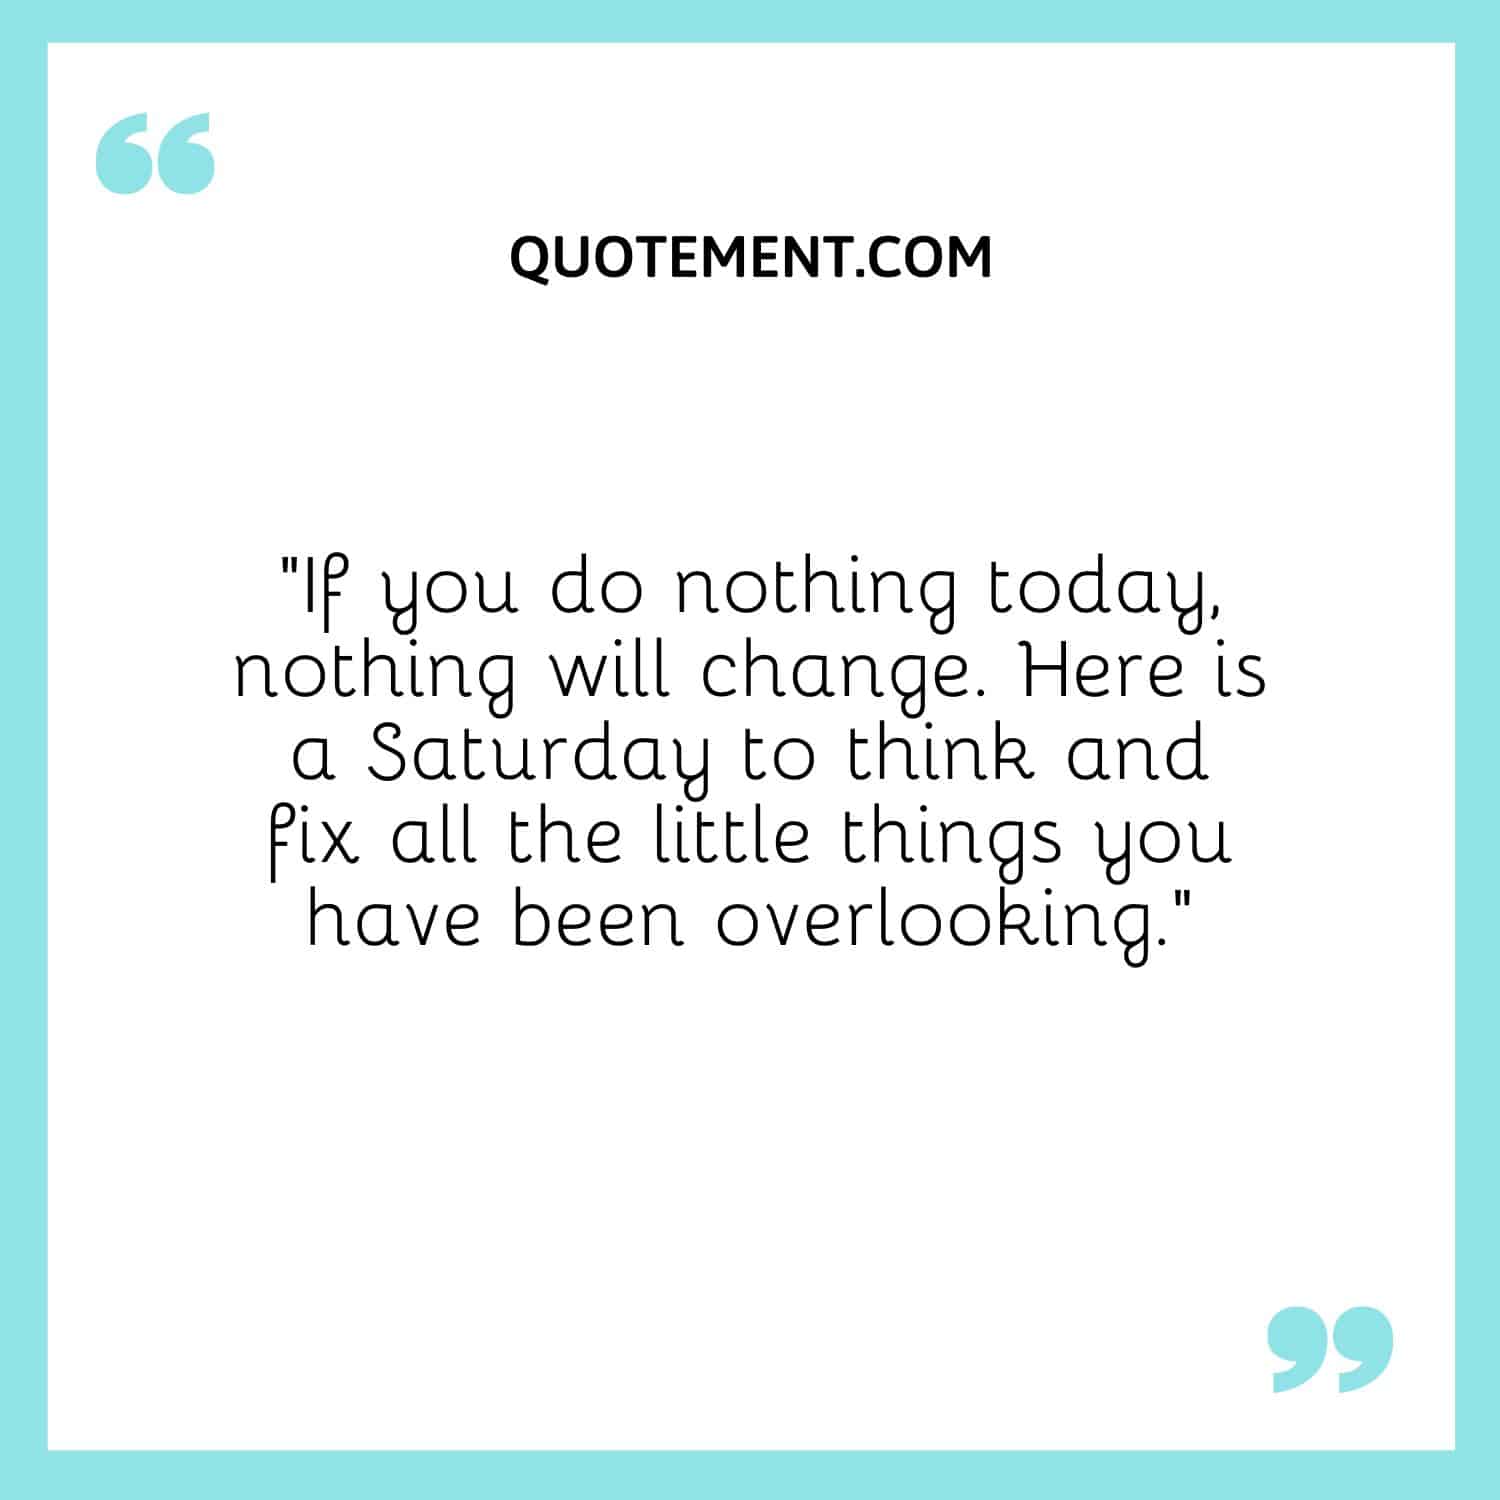 “If you do nothing today, nothing will change. Here is a Saturday to think and fix all the little things you have been overlooking.”